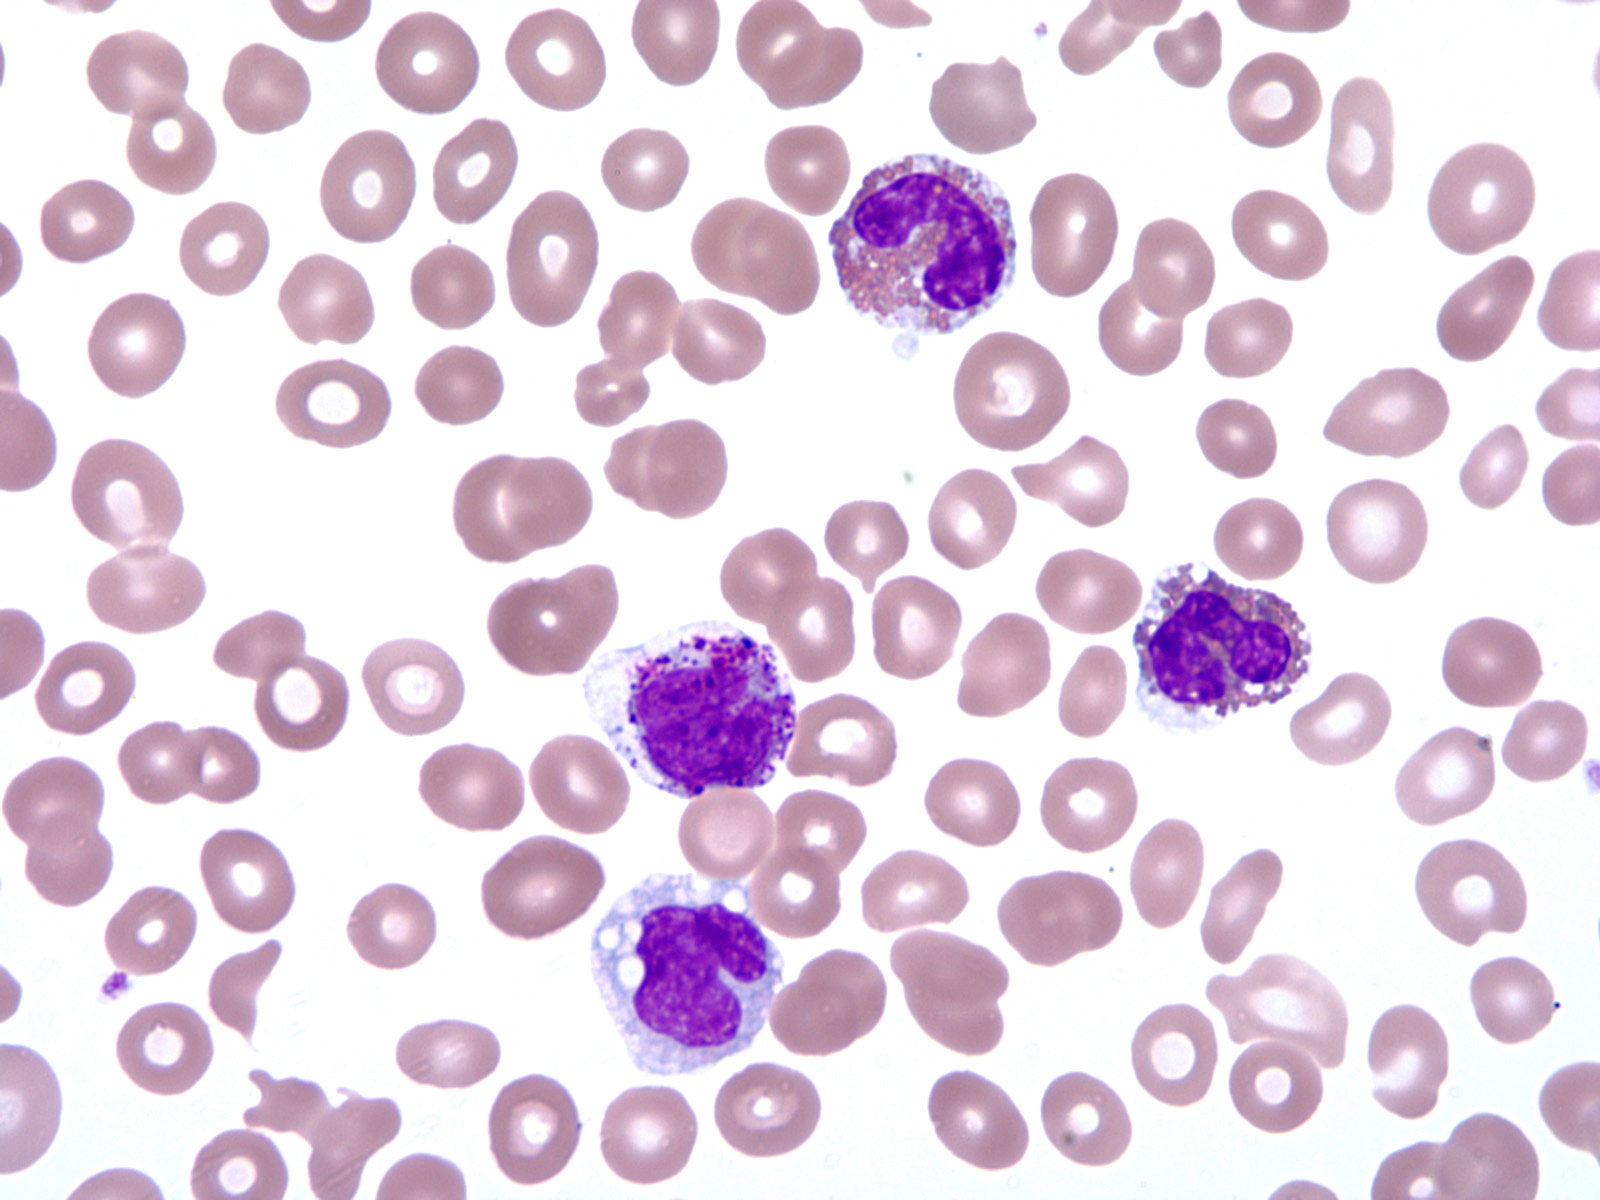 Increased eosinophils with abnormal granulation